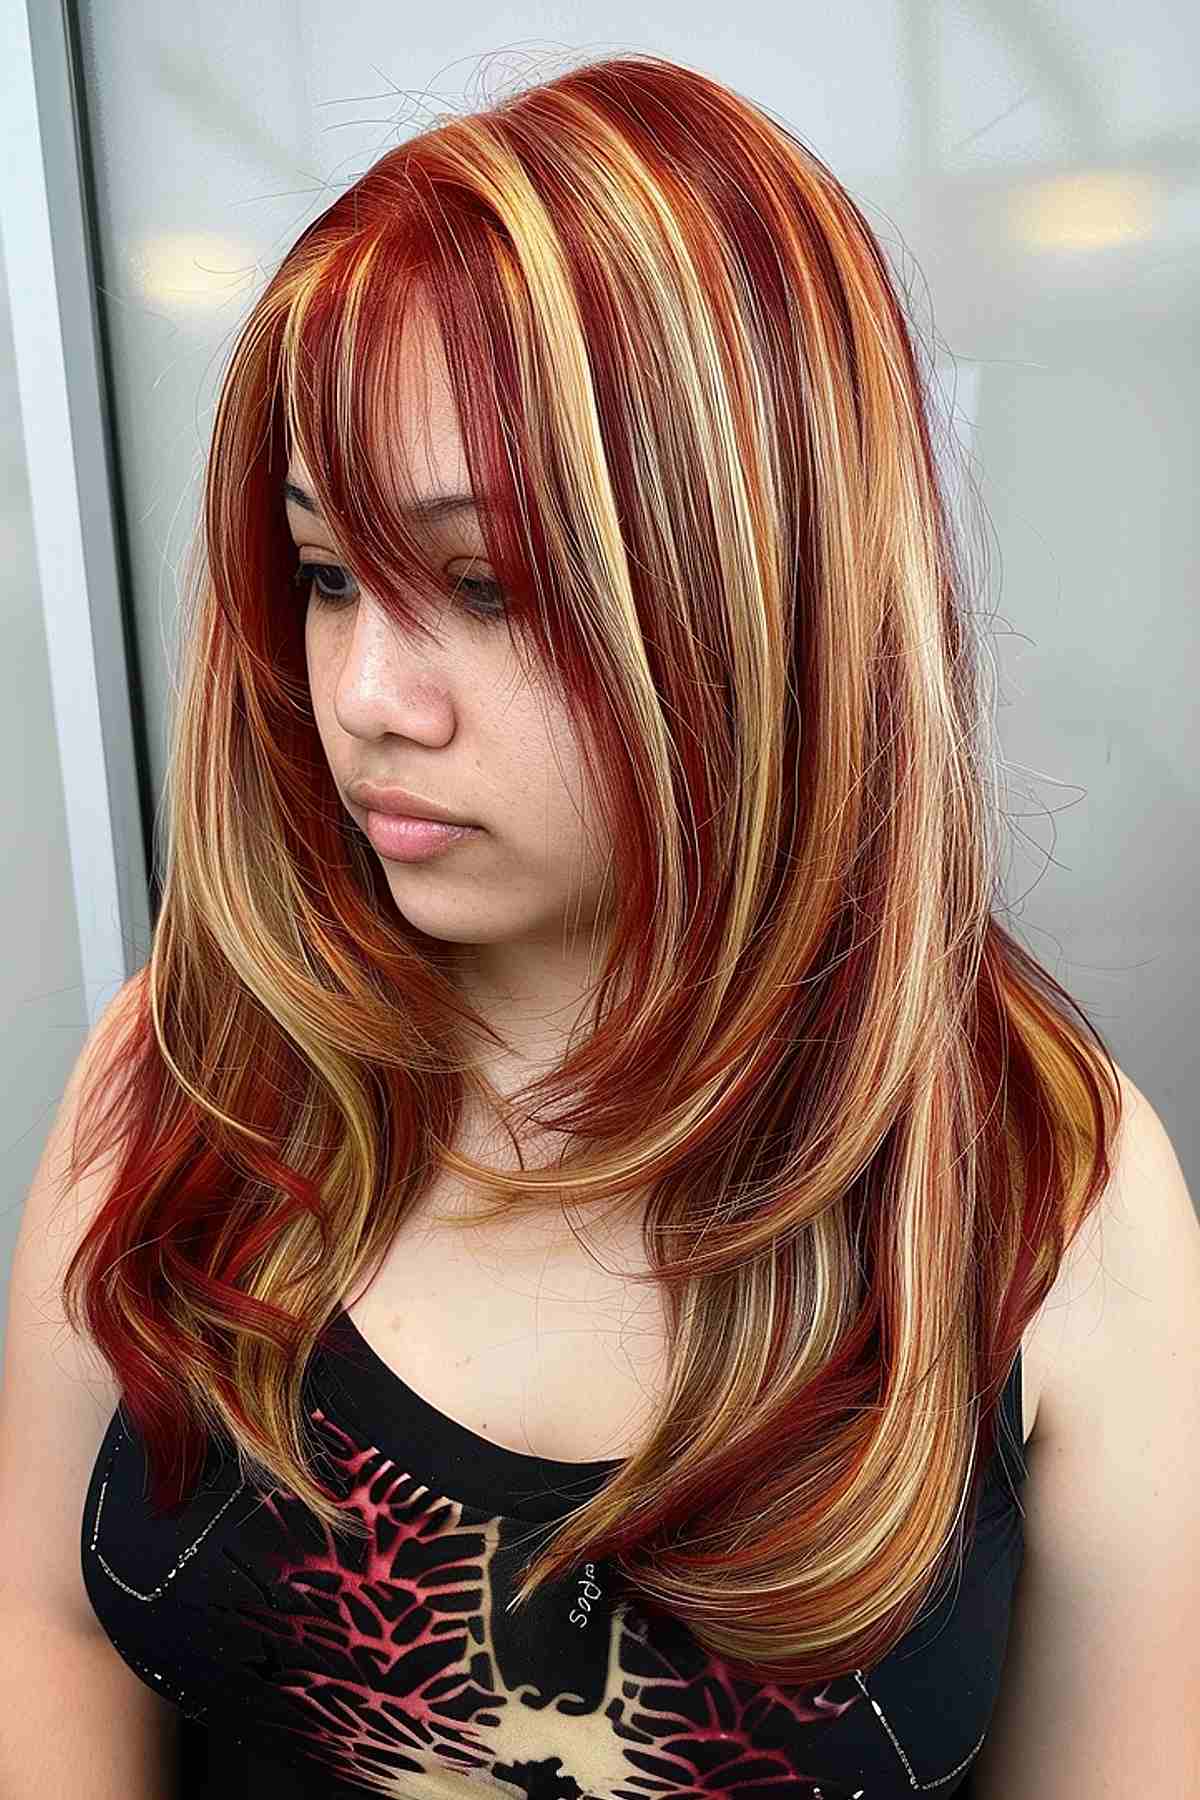 Medium-length red hair with chunky blonde highlights and blunt bangs